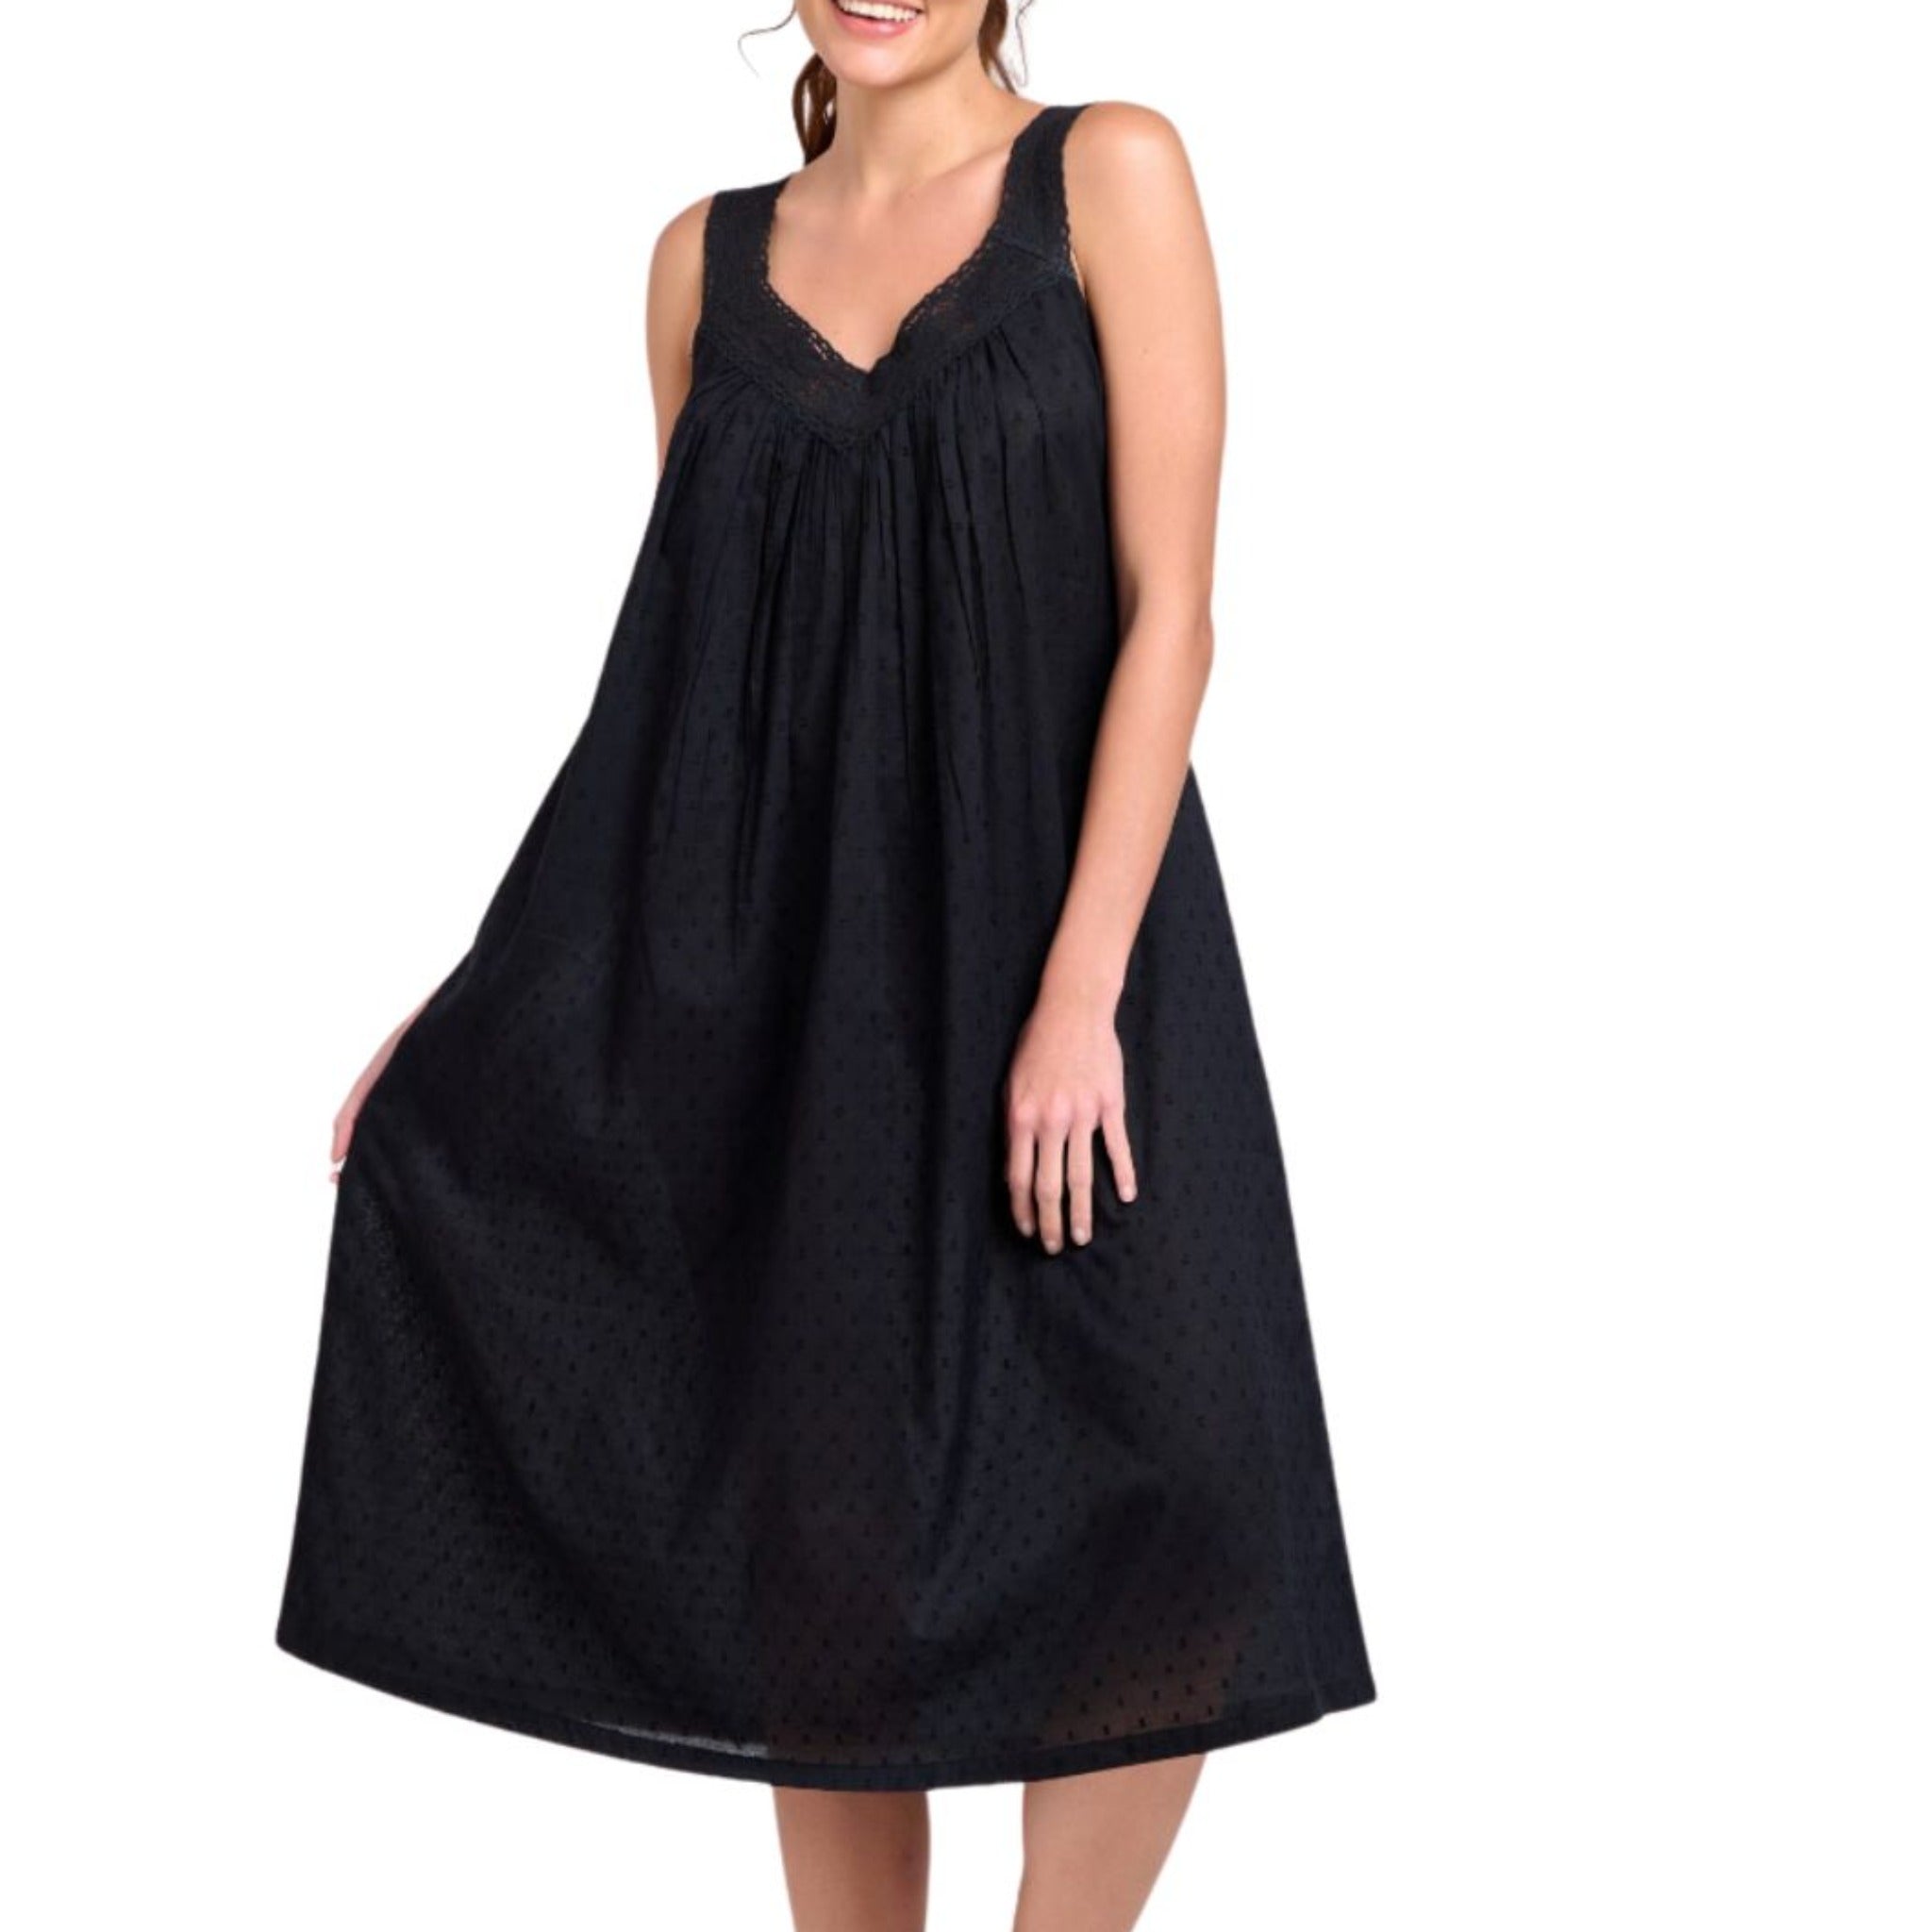 black nightgown - lightweight cotton - large sizes - ships from Australia 